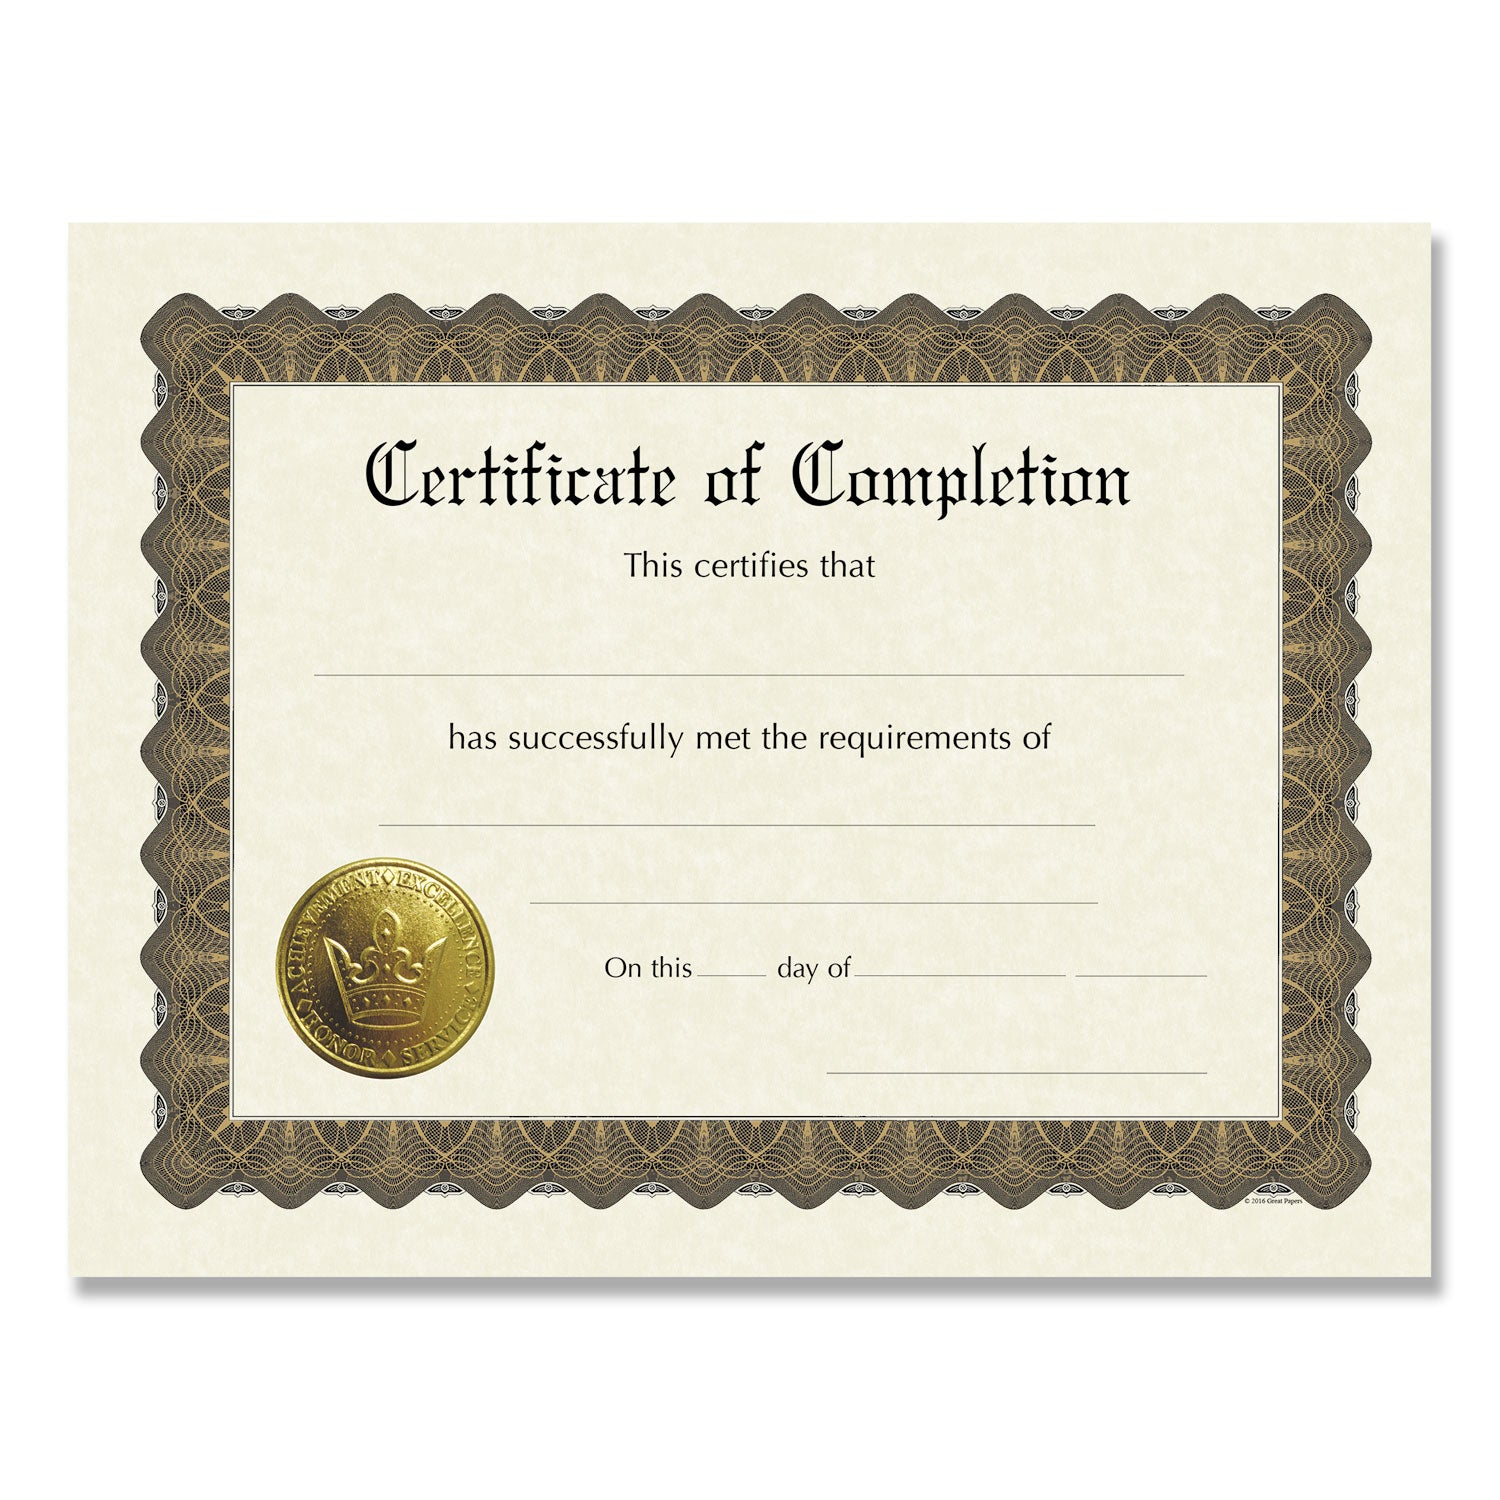 ready-to-use-certificates-completion-11-x-85-ivory-brown-gold-colors-with-brown-border-6-pack_cos930400 - 1